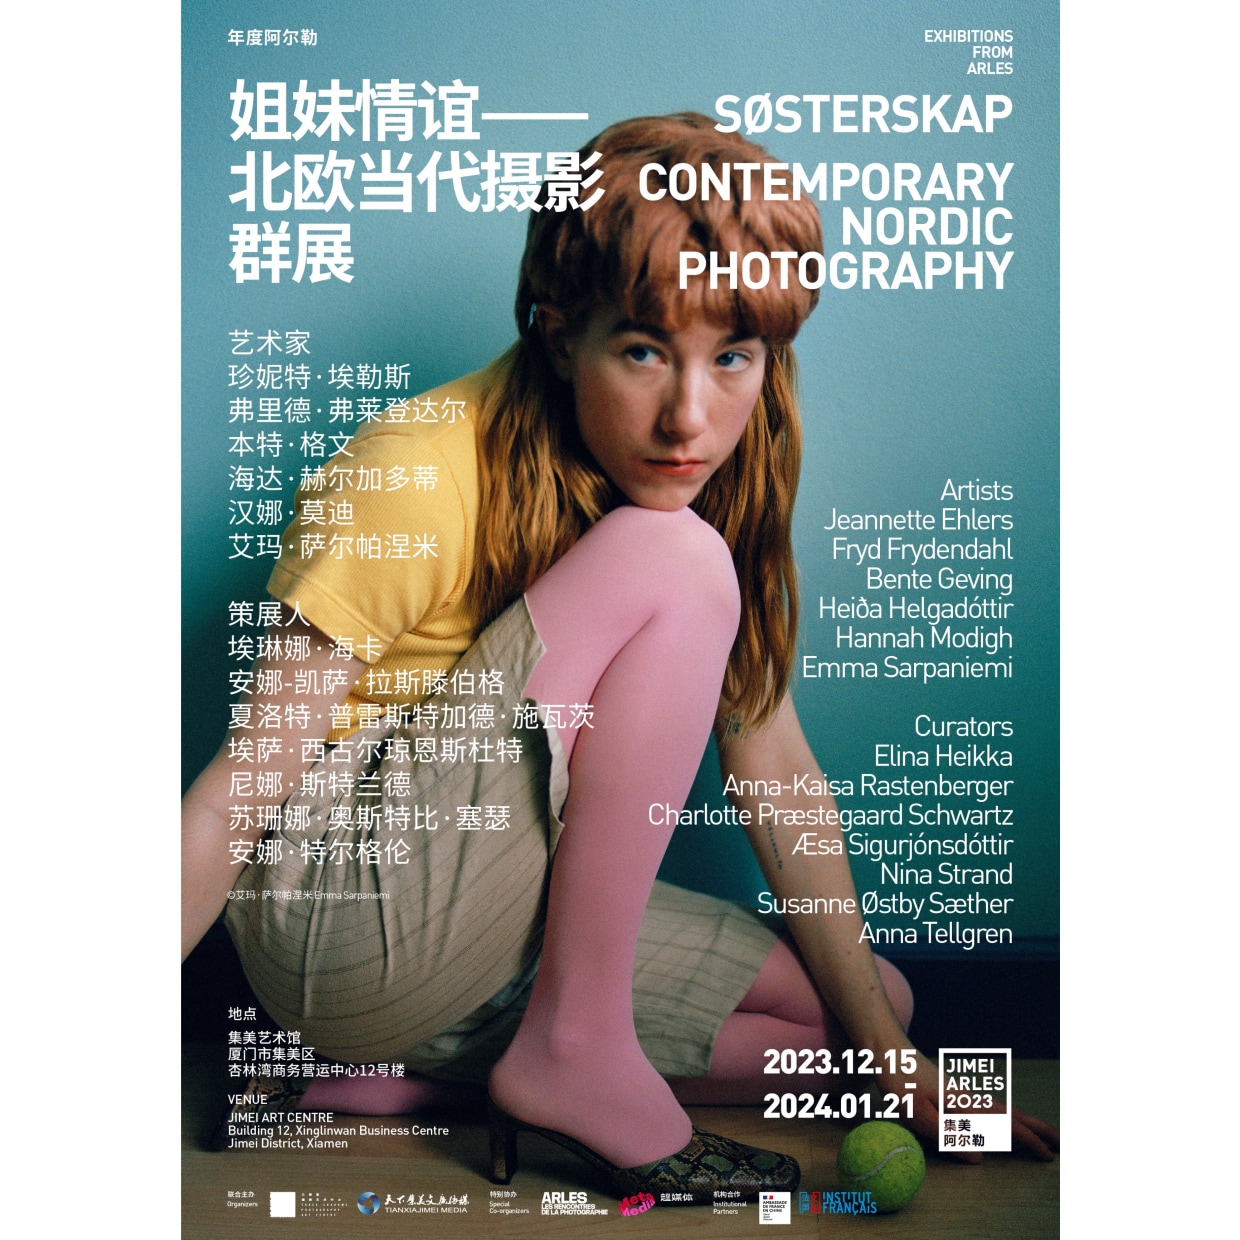 SØSTERSKAP， Contemporary Nordic Photography 'Søsterskap [Sisterhood]' brings together photographers of different generations from the Nordic countries whose works, using approaches...